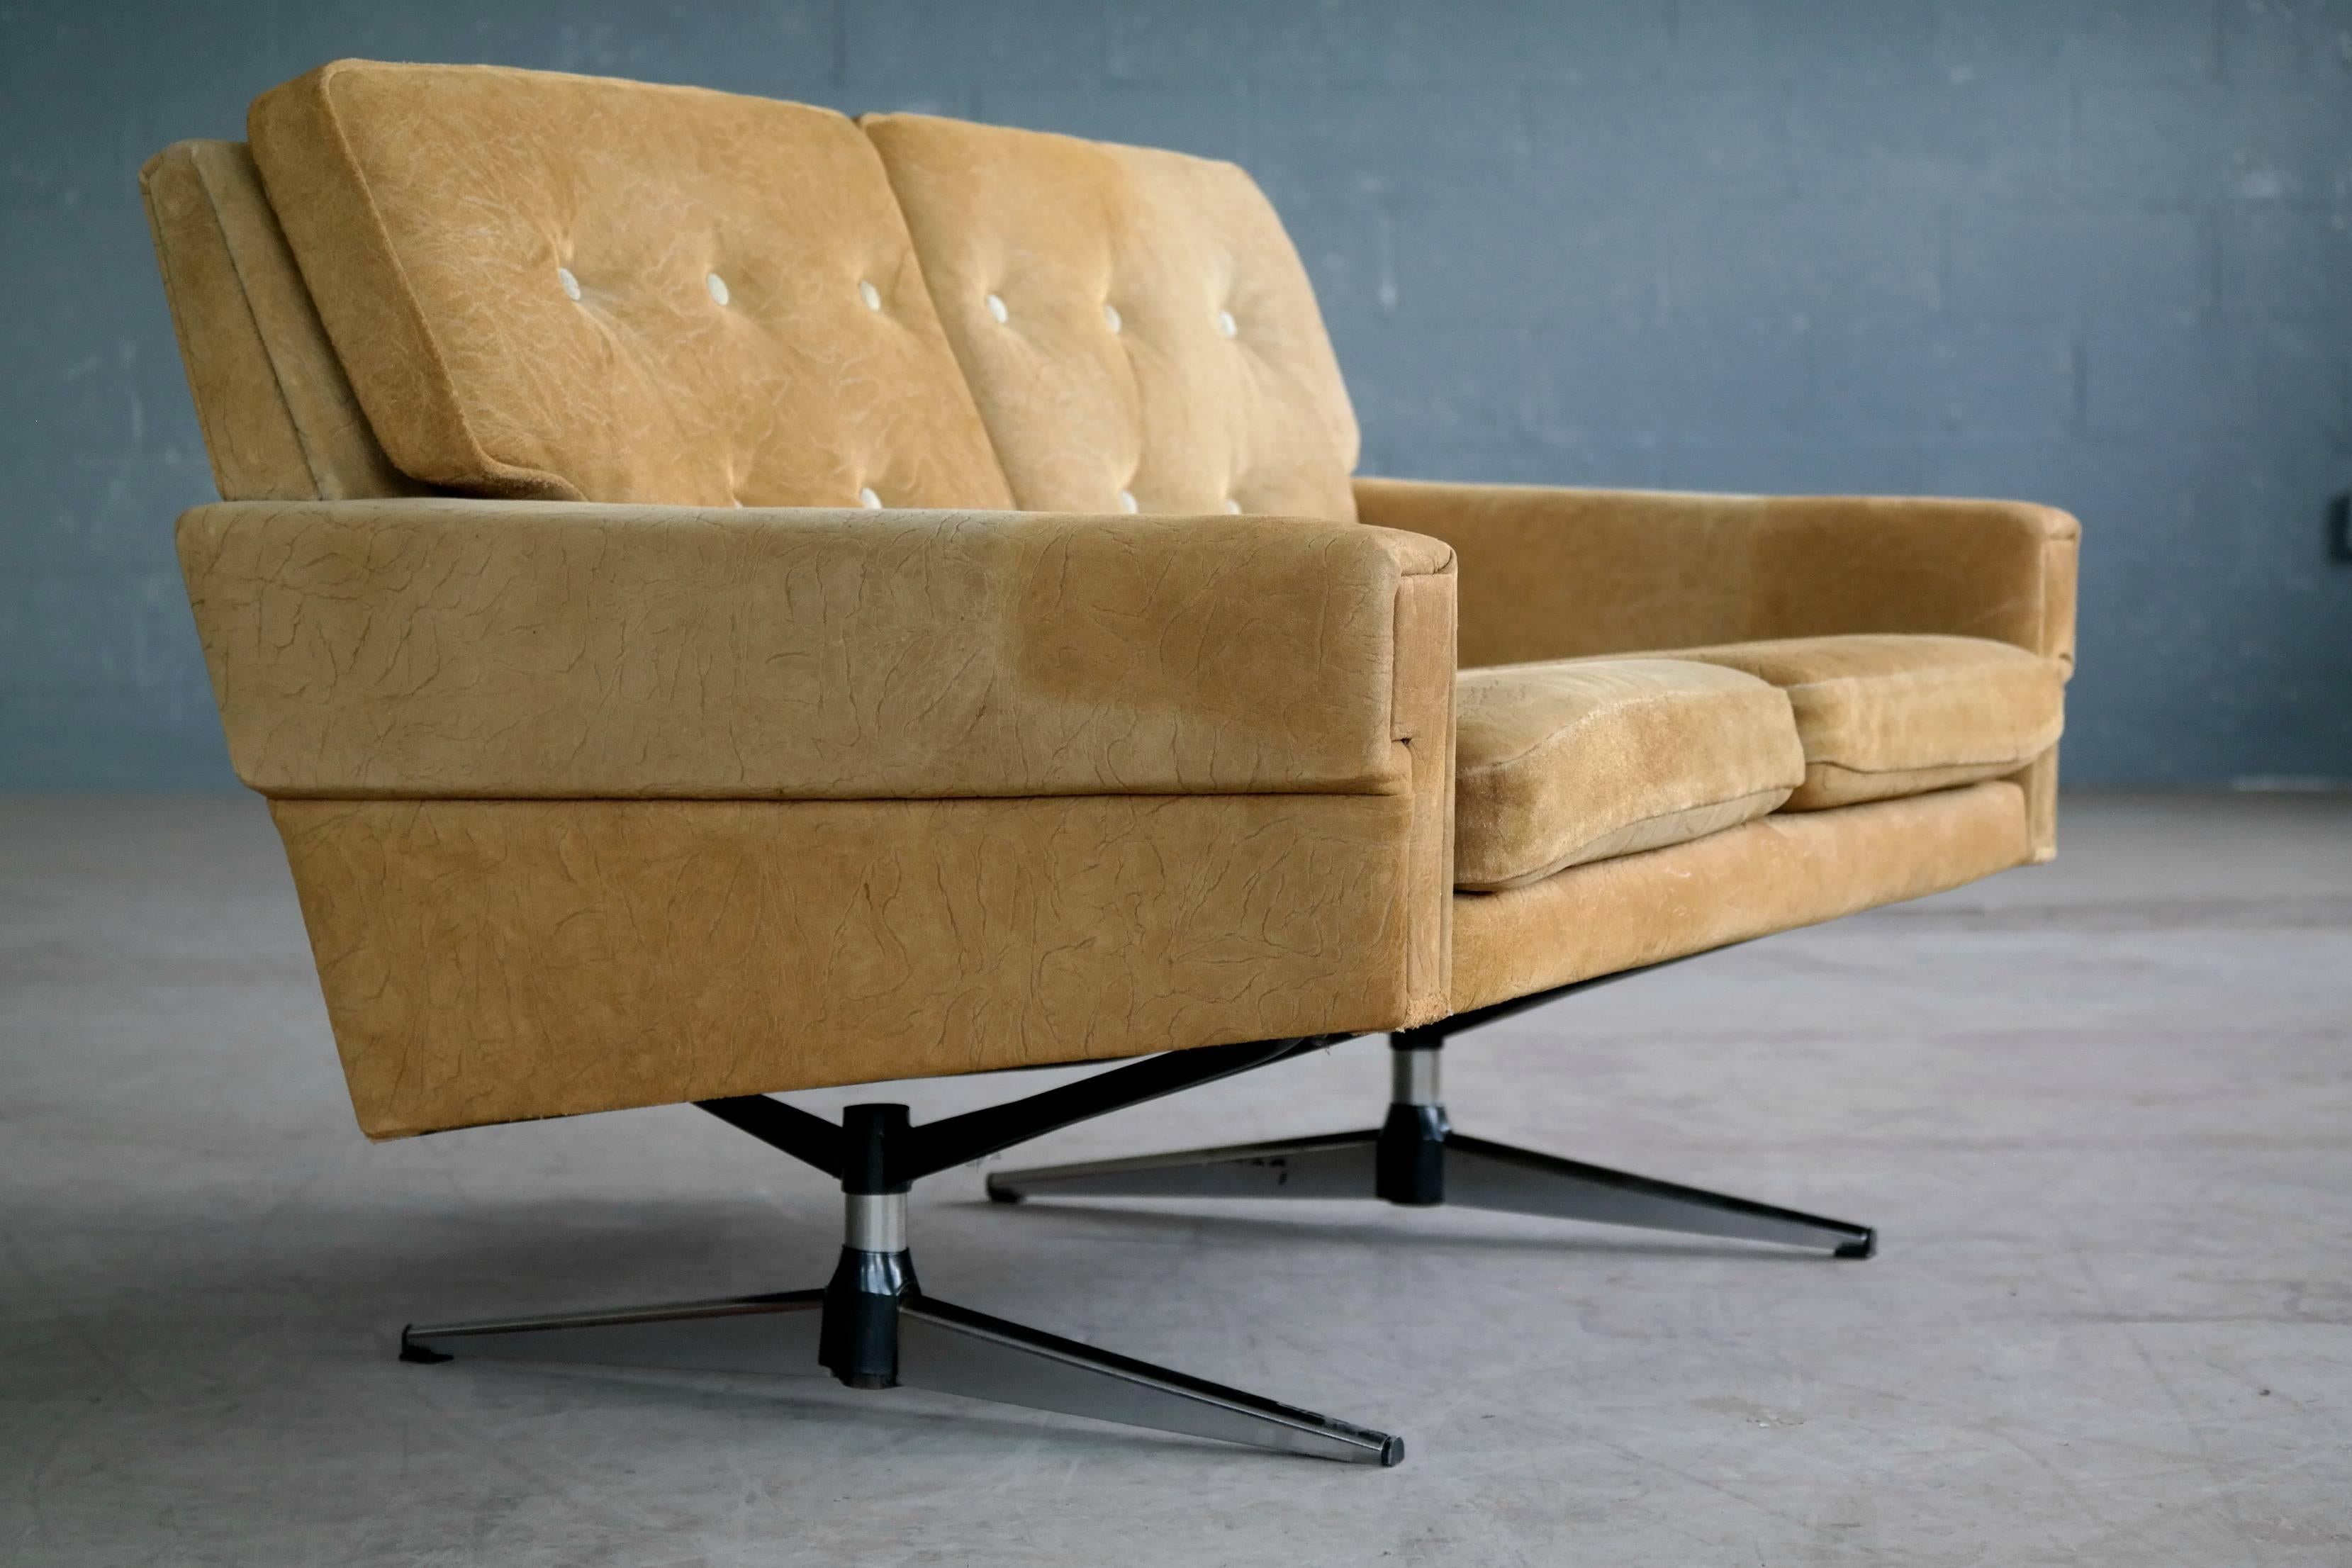 Mid-20th Century Svend Skipper Attributed Airport-Style Two-Seat Sofa or Settee in Suede